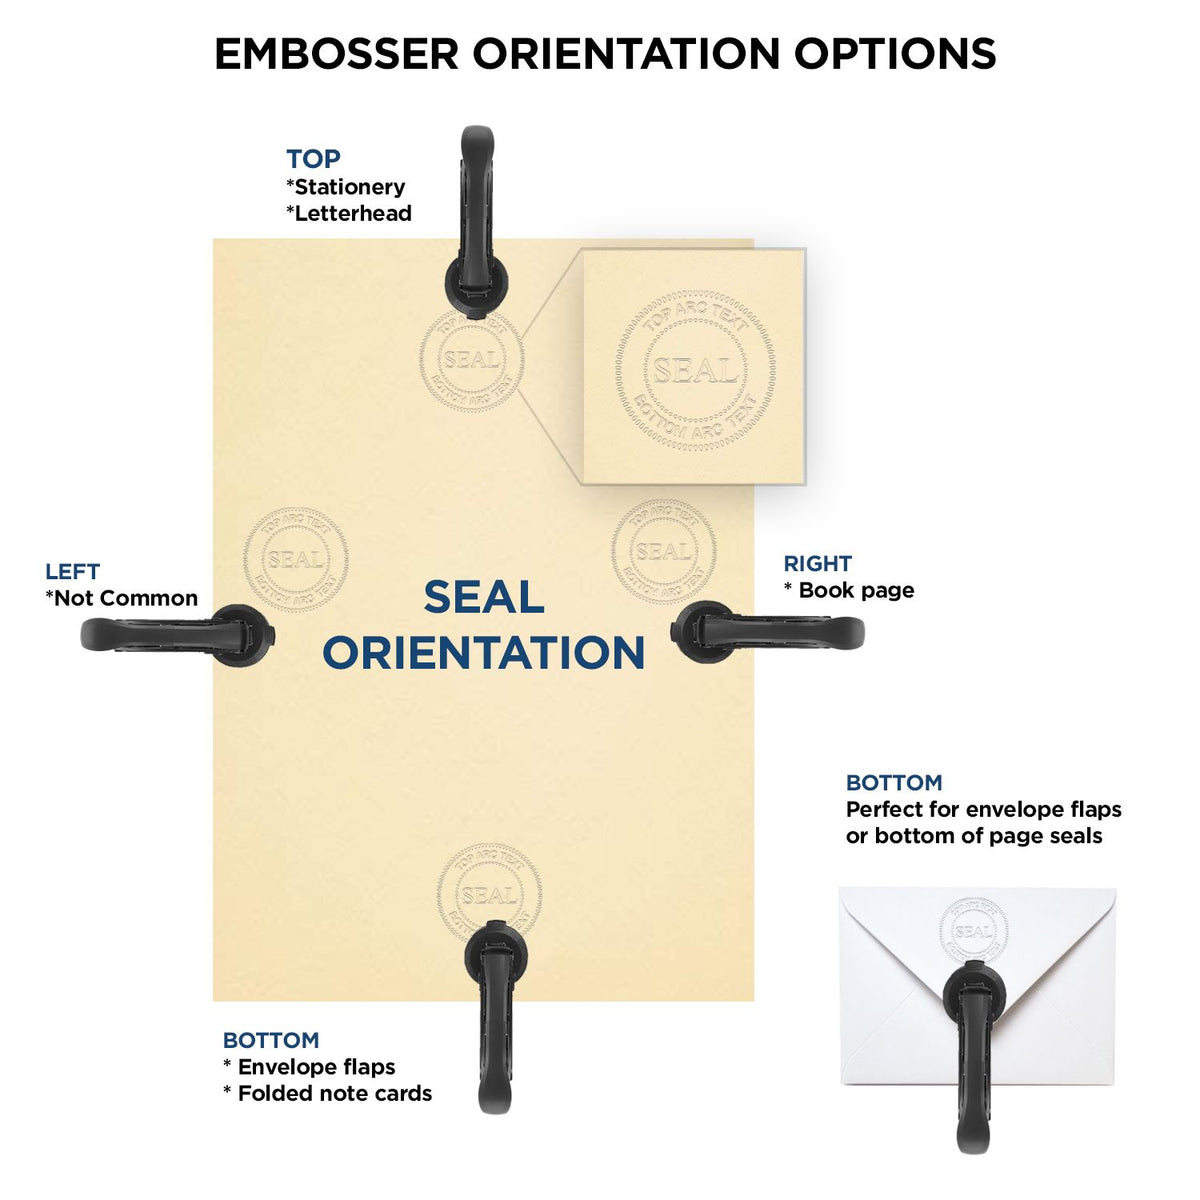 An infographic for the Heavy Duty Cast Iron West Virginia Geologist Seal Embosser showing embosser orientation, this is showing examples of a top, bottom, right and left insert.